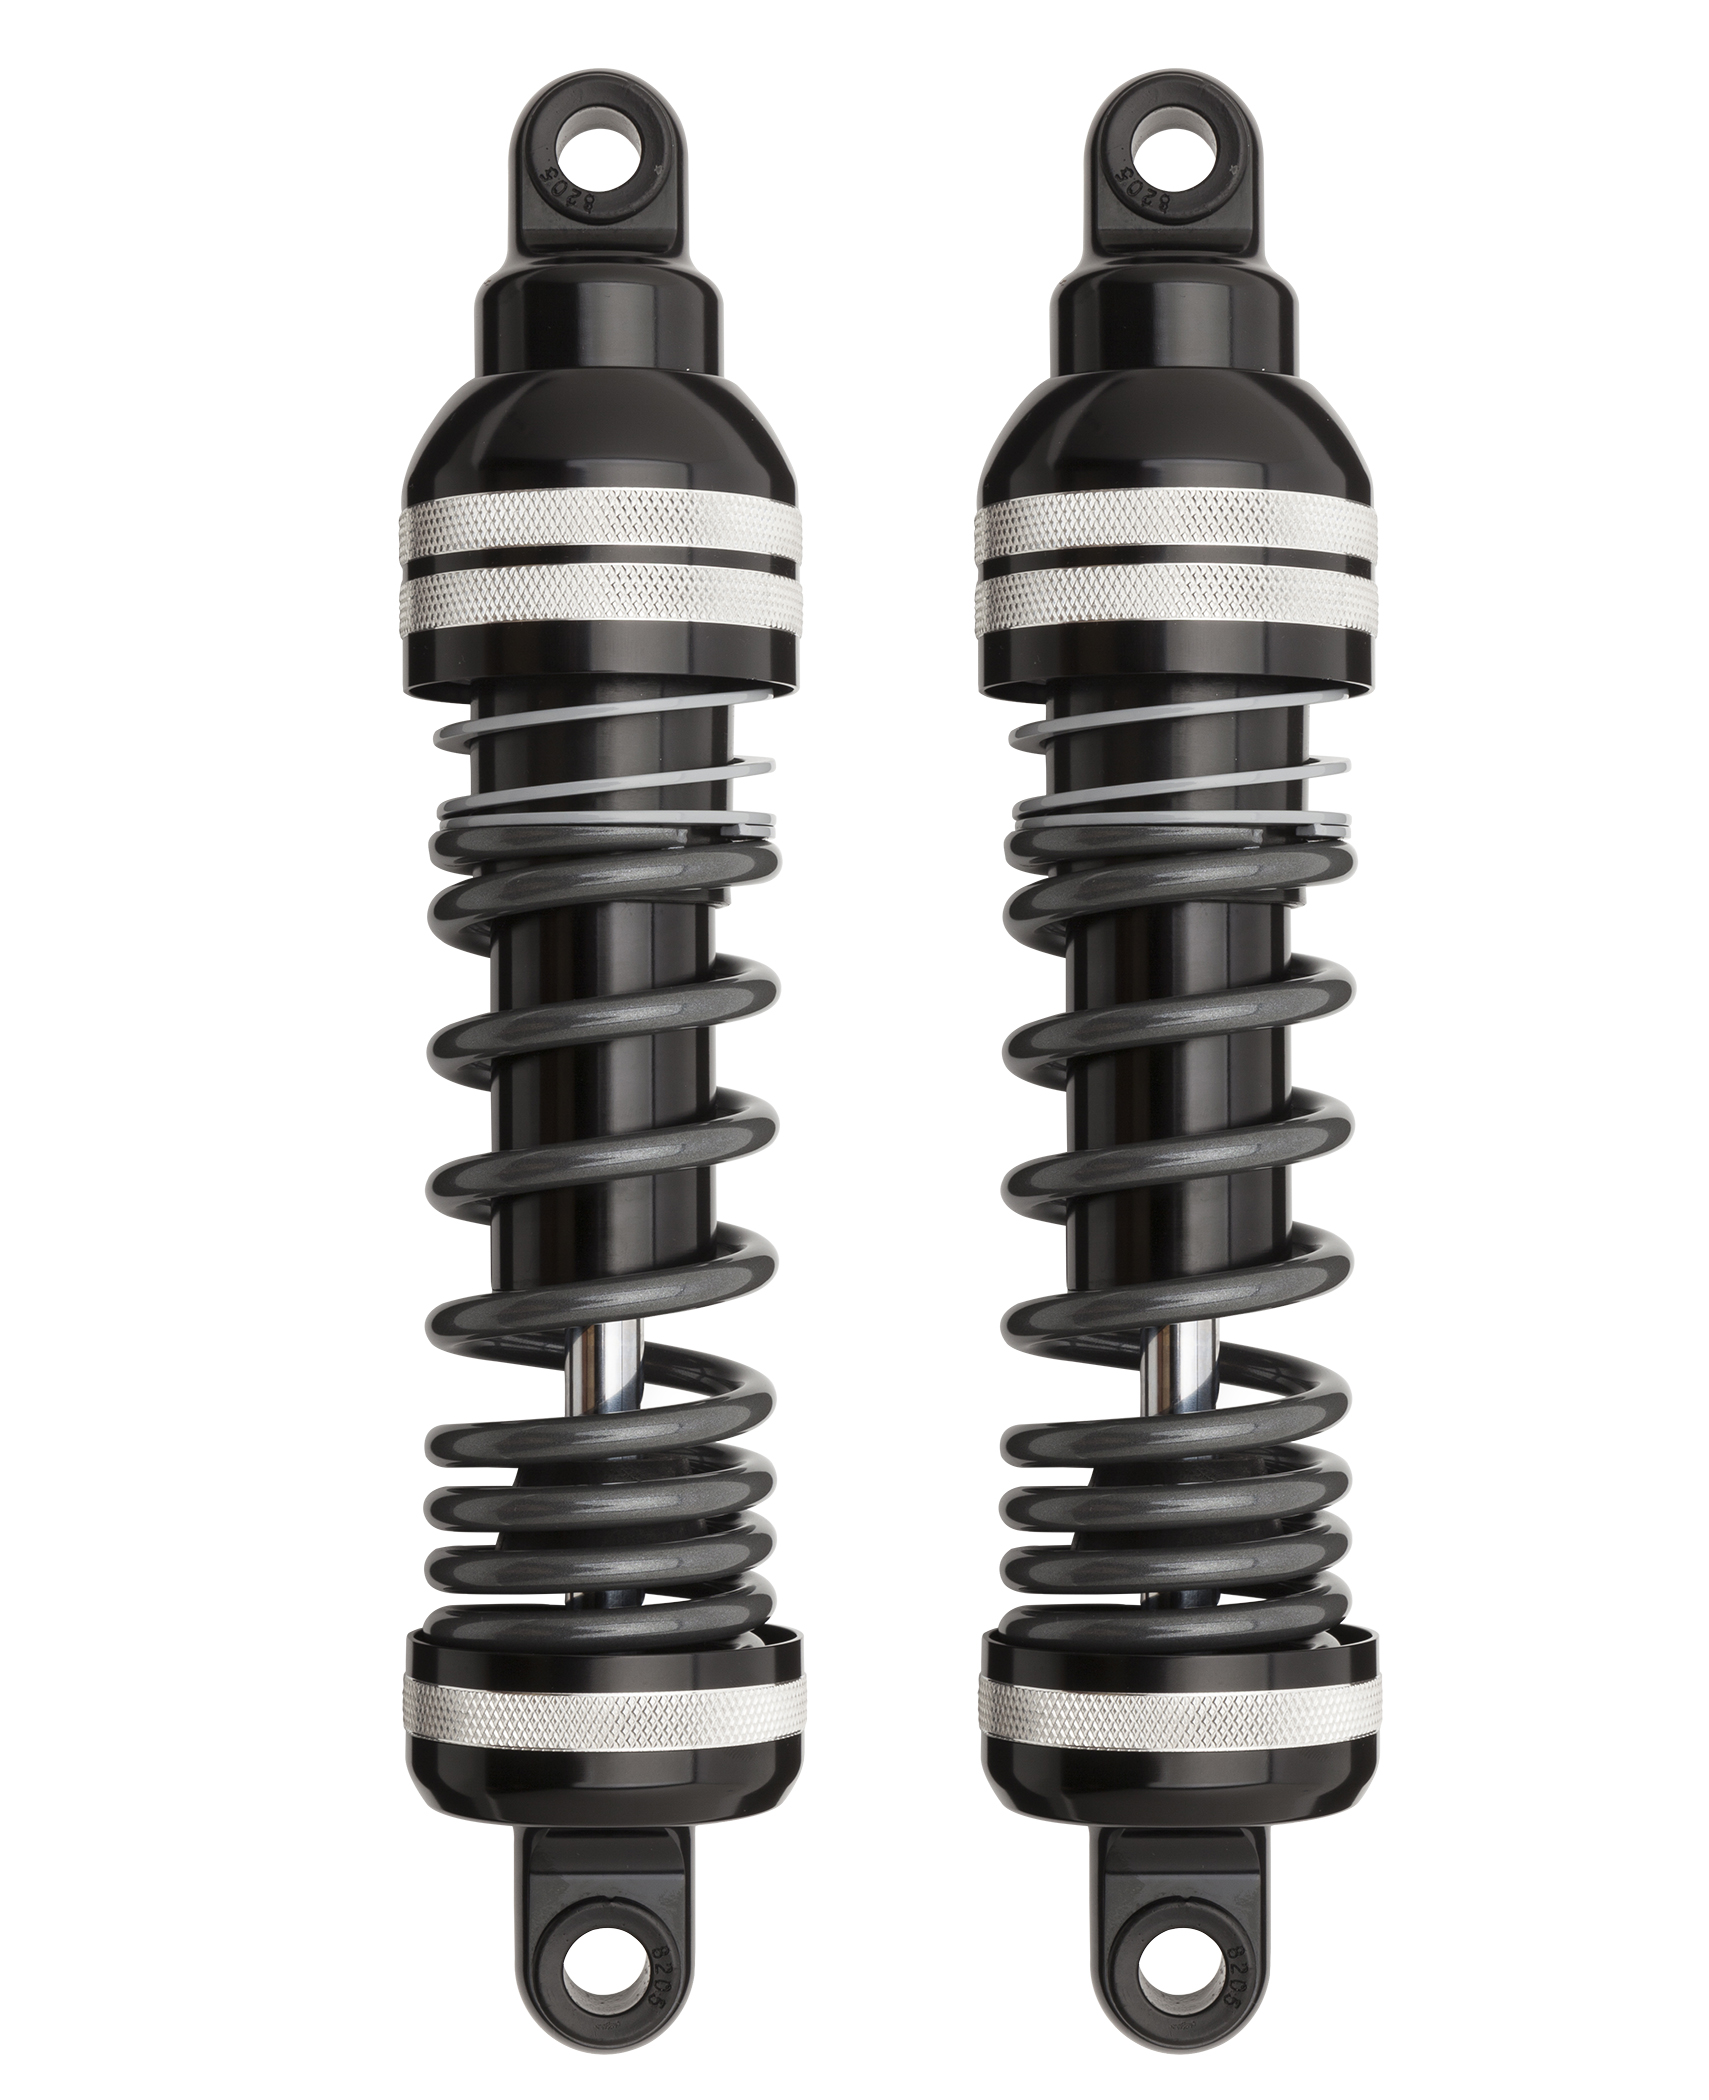 https://www.progressivesuspension.com/assets/images/products/944-series-ultra-touring-and-ultra-low-shocks_6.jpg